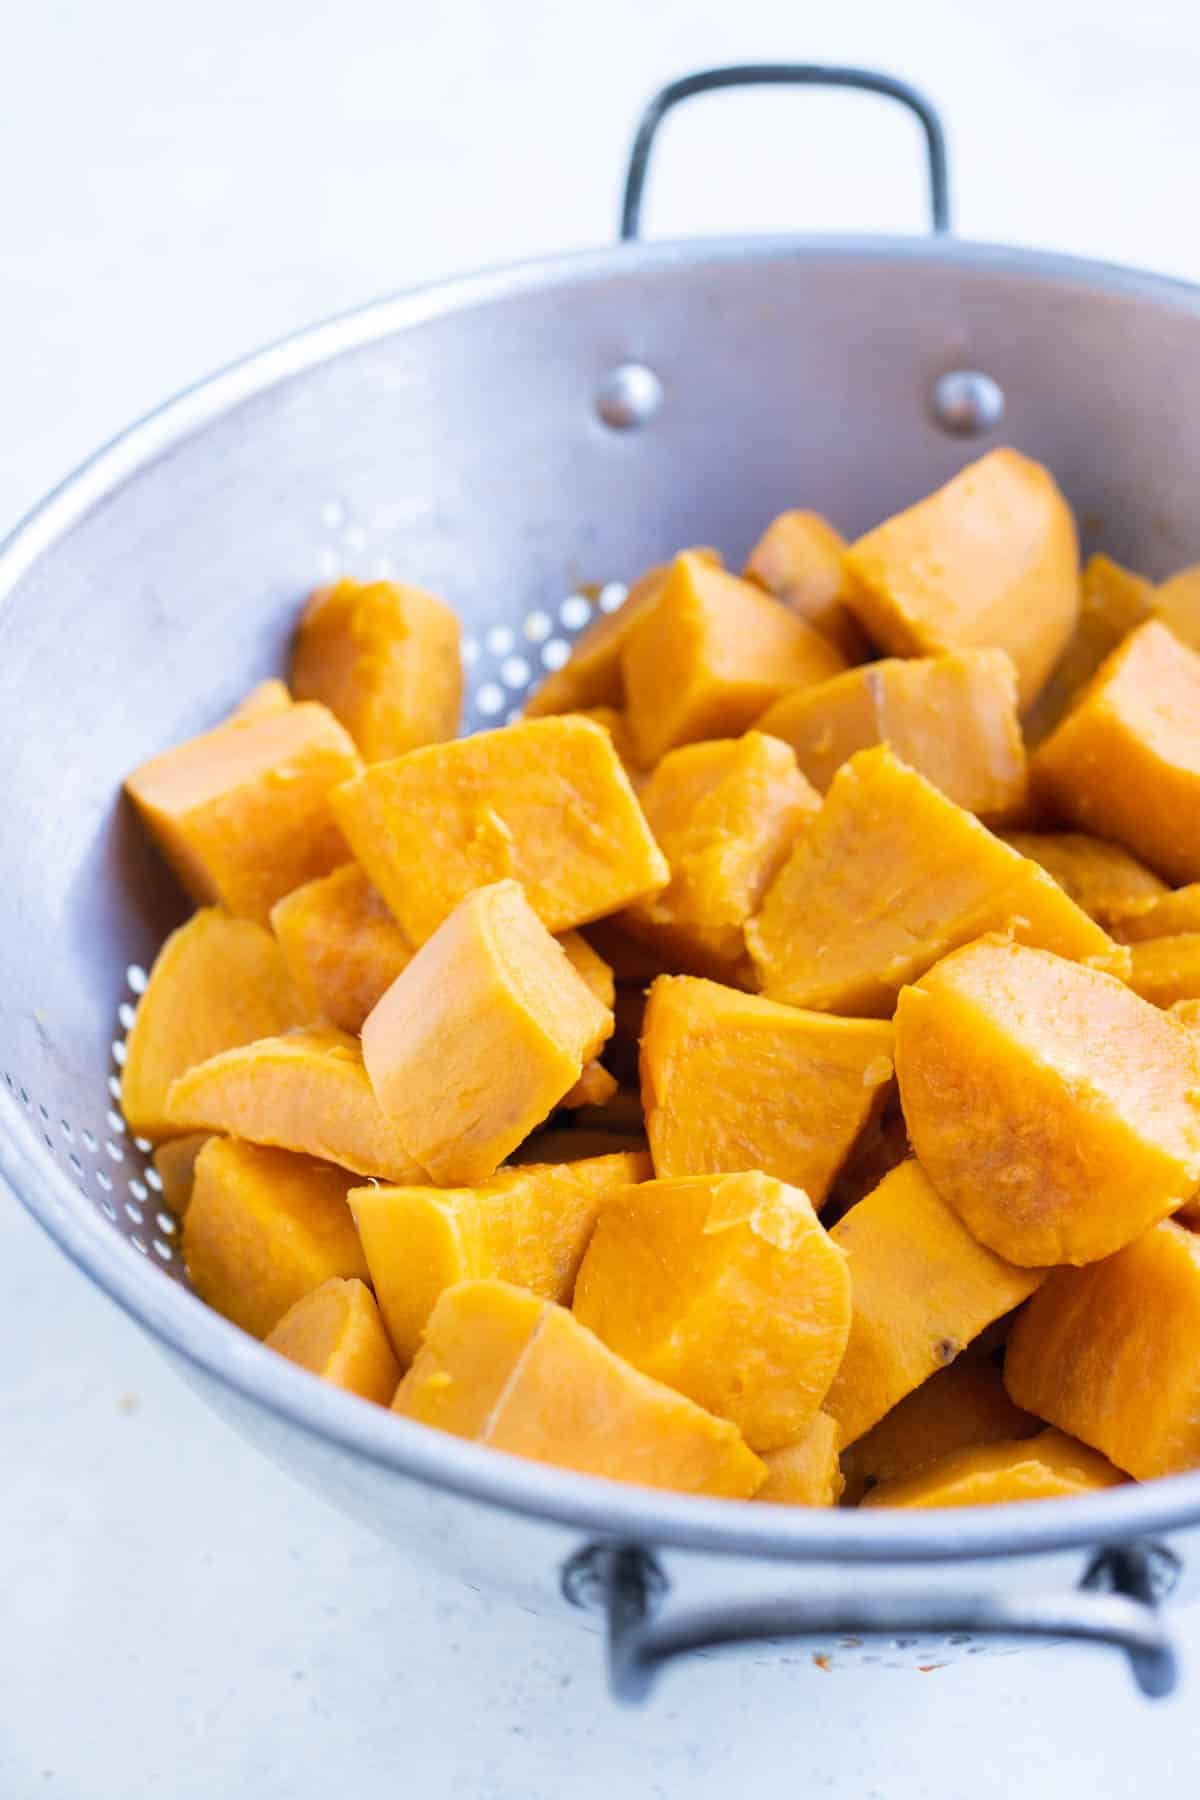 Cubed and diced sweet potatoes are drained in a colander after boiling.